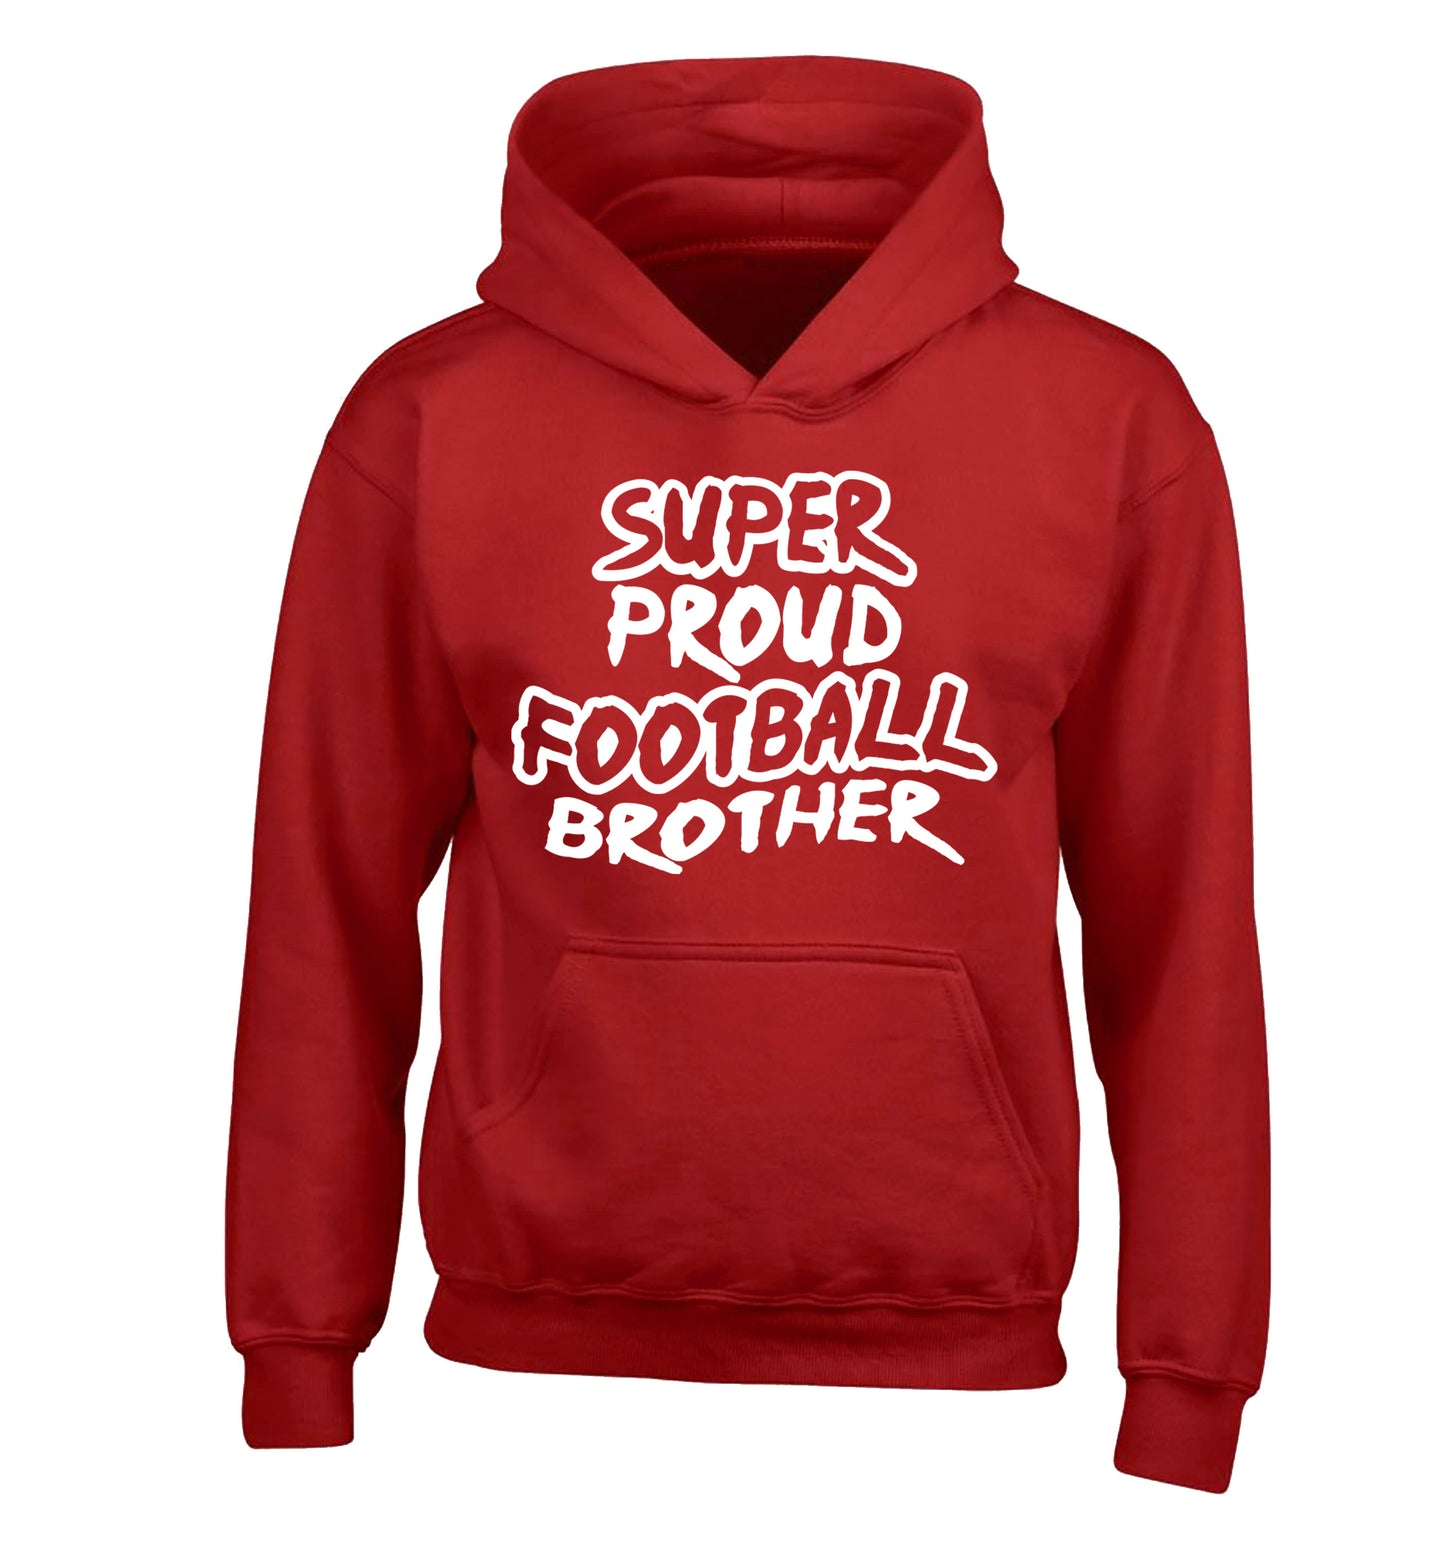 Super proud football brother children's red hoodie 12-14 Years